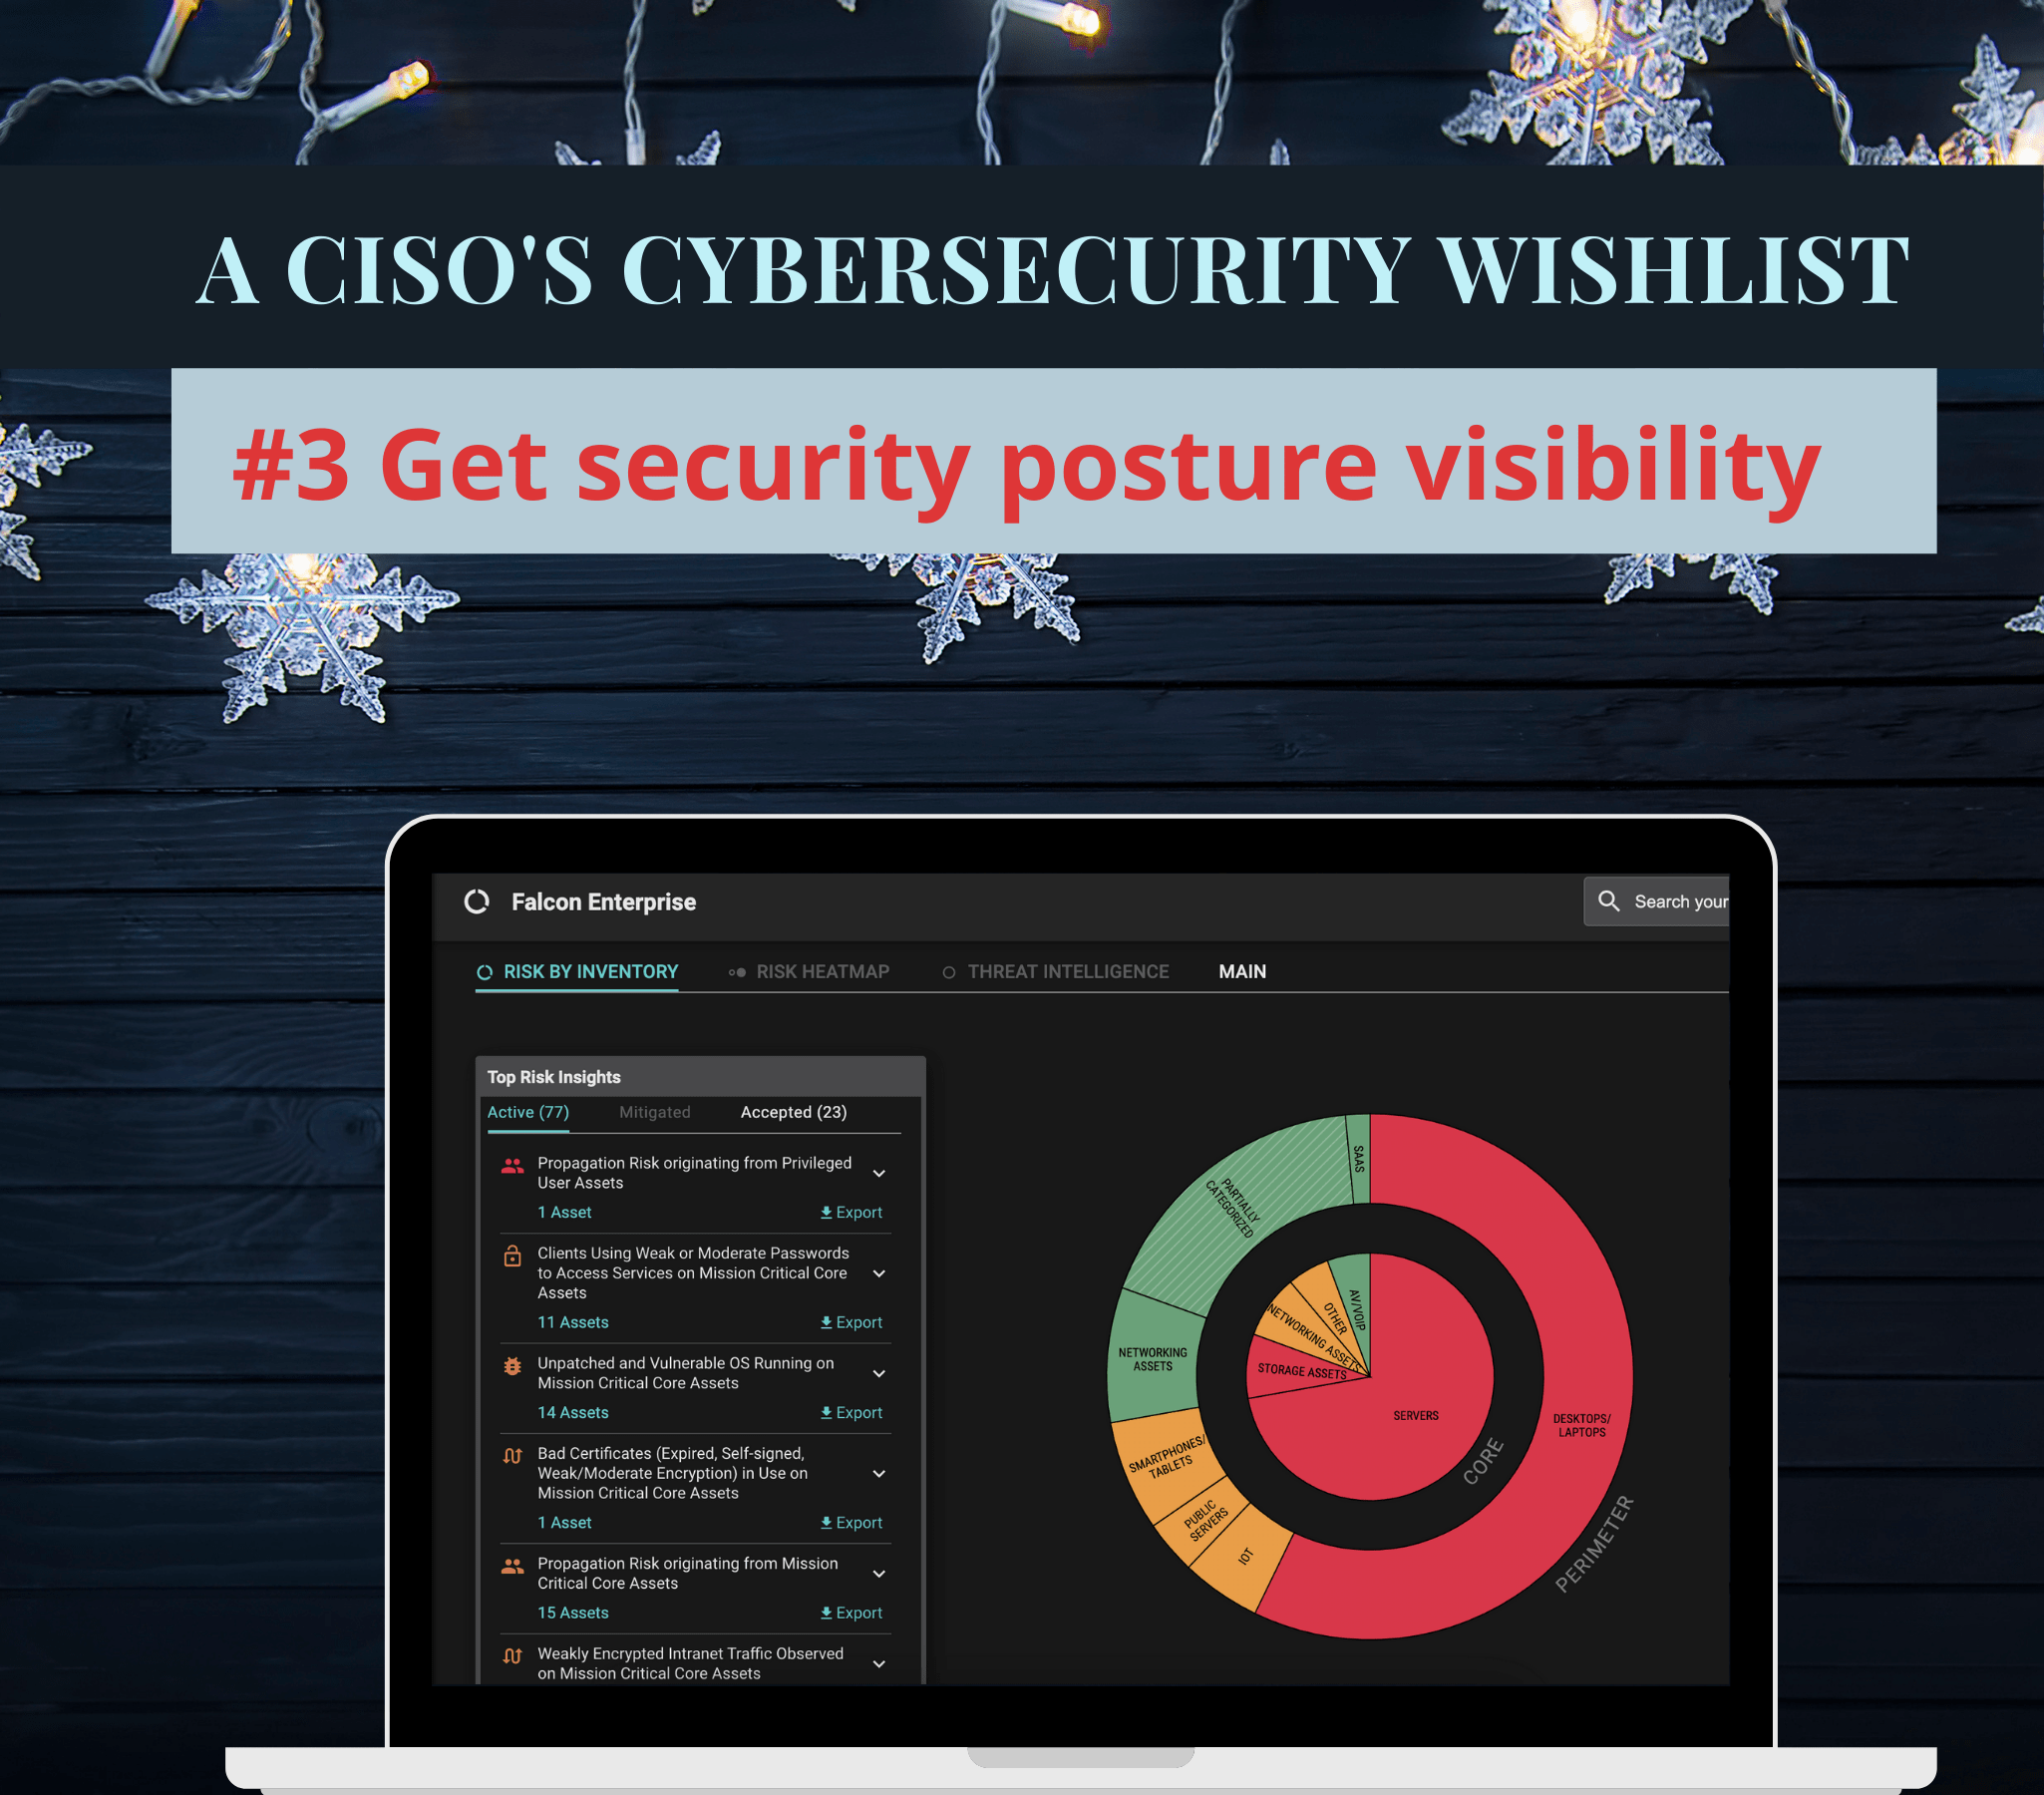 A CISOs Cybersecurity Wishlist - Get security posture visibility